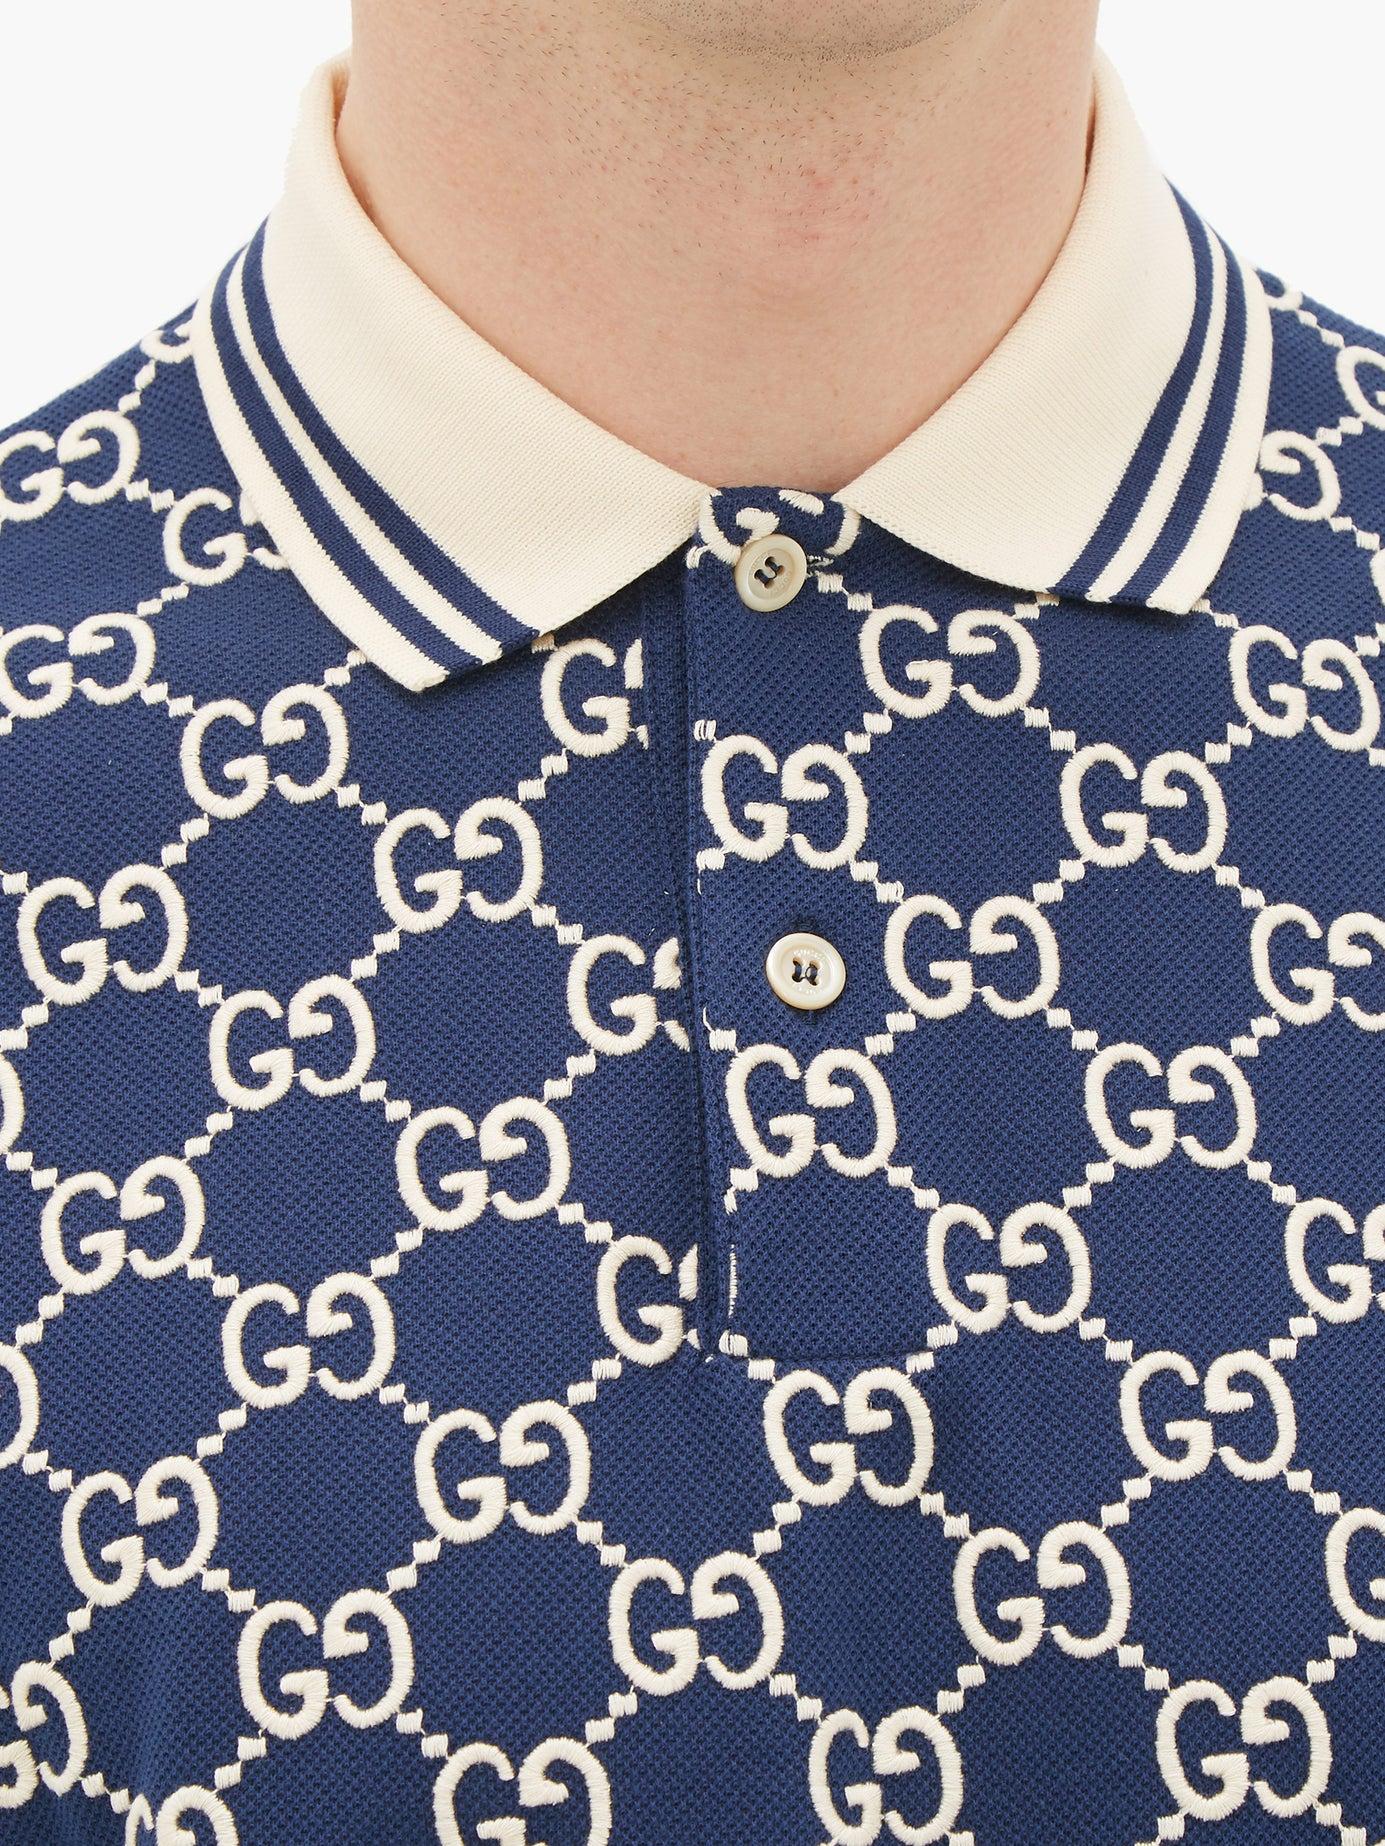 Gucci Cotton Gg Polo Shirt in Navy Blue (Blue) for Men - Save 63% | Lyst